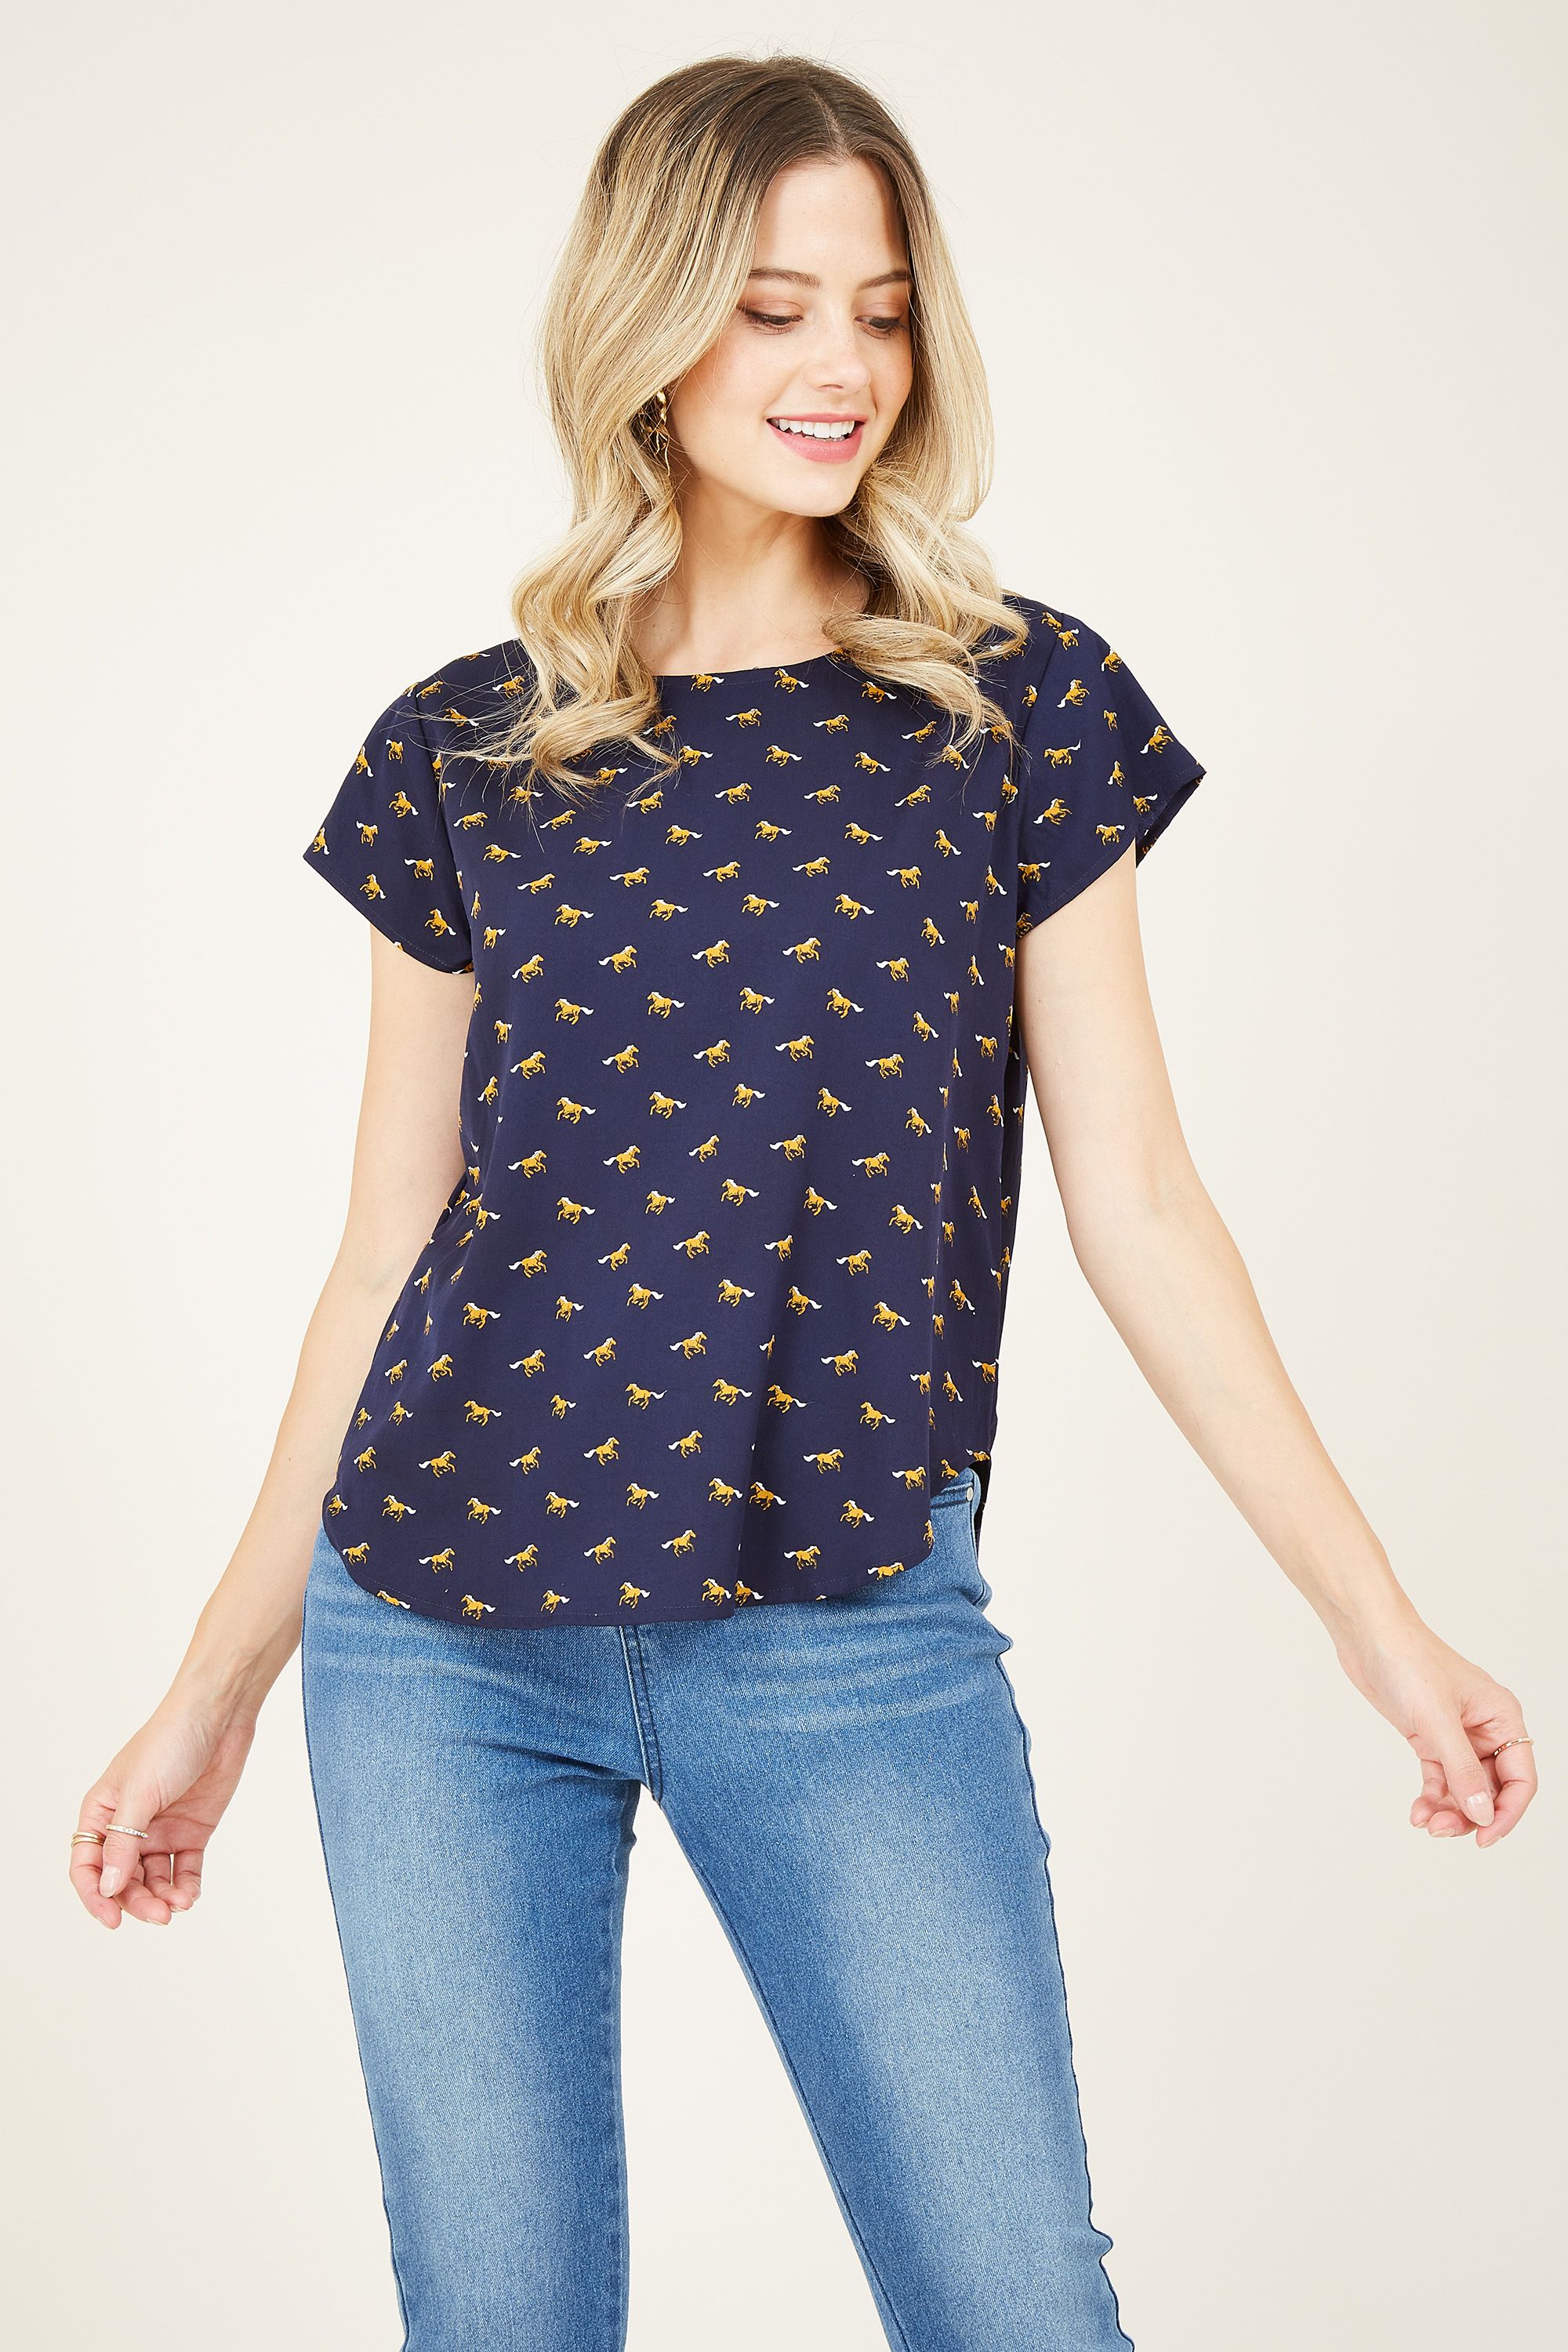 With a fun four-legged print, our Horse Top is the perfect throw-on-and-go piece. In the classic t-shirt shape, it's cut from lightweight fabric that's hangs in a relaxed shape. Perfect for tucking in, a nape button gives your look its oh-so-chic shaping.